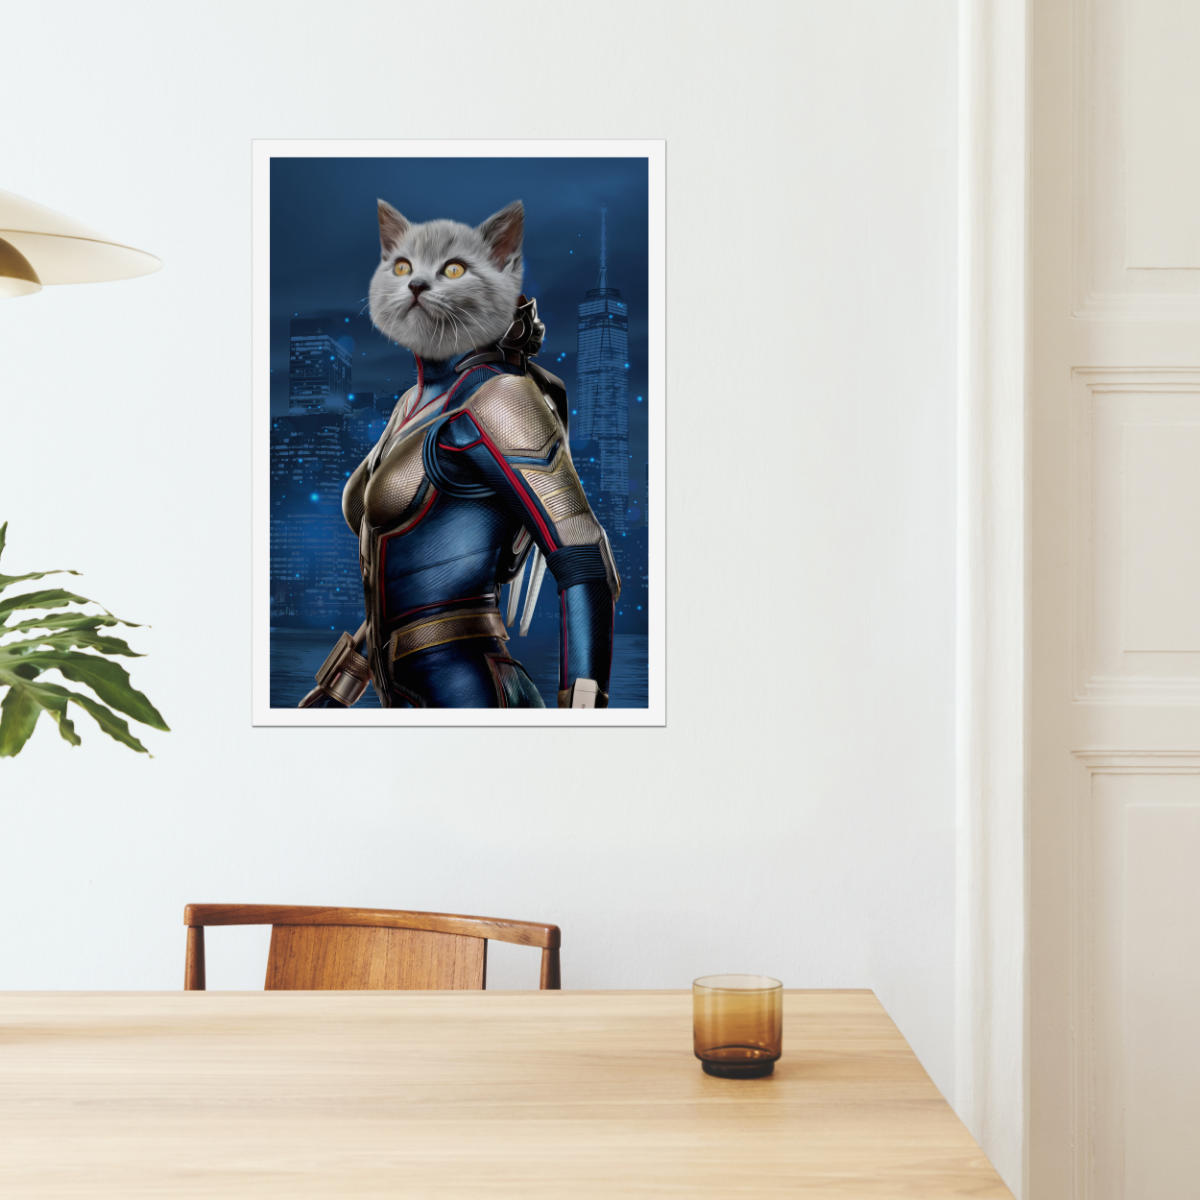 The Wasp: Custom Pet Poster - Paw & Glory - #pet portraits# - #dog portraits# - #pet portraits uk#Paw & Glory, paw and glory, my pet painting, aristocrat dog painting, small dog portrait, in home pet photography, paintings of pets from photos, professional pet photos, pet portraits